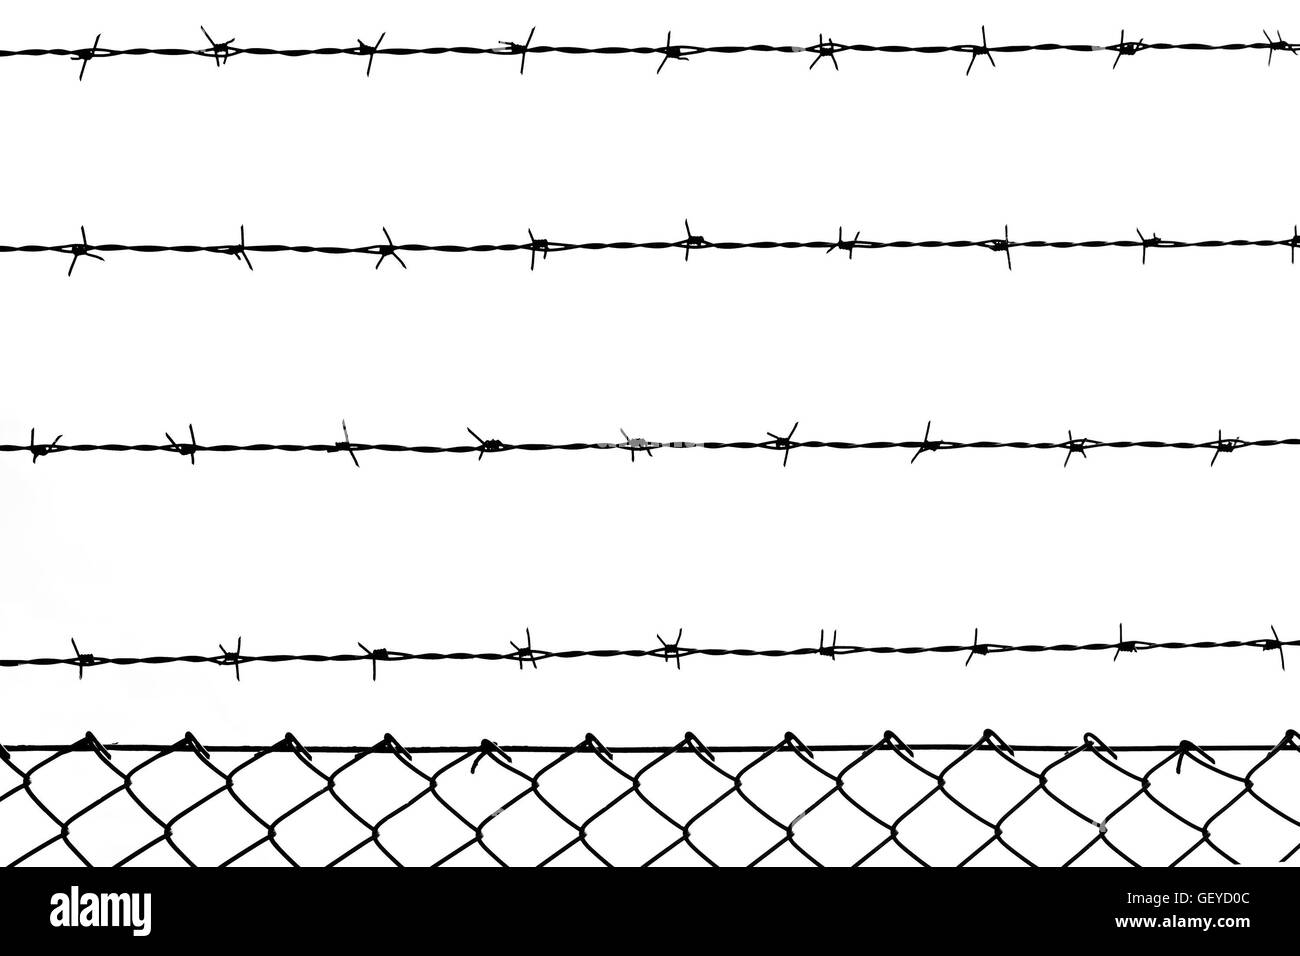 Barbed wire in backlight arranged in parallel lines. Stock Photo